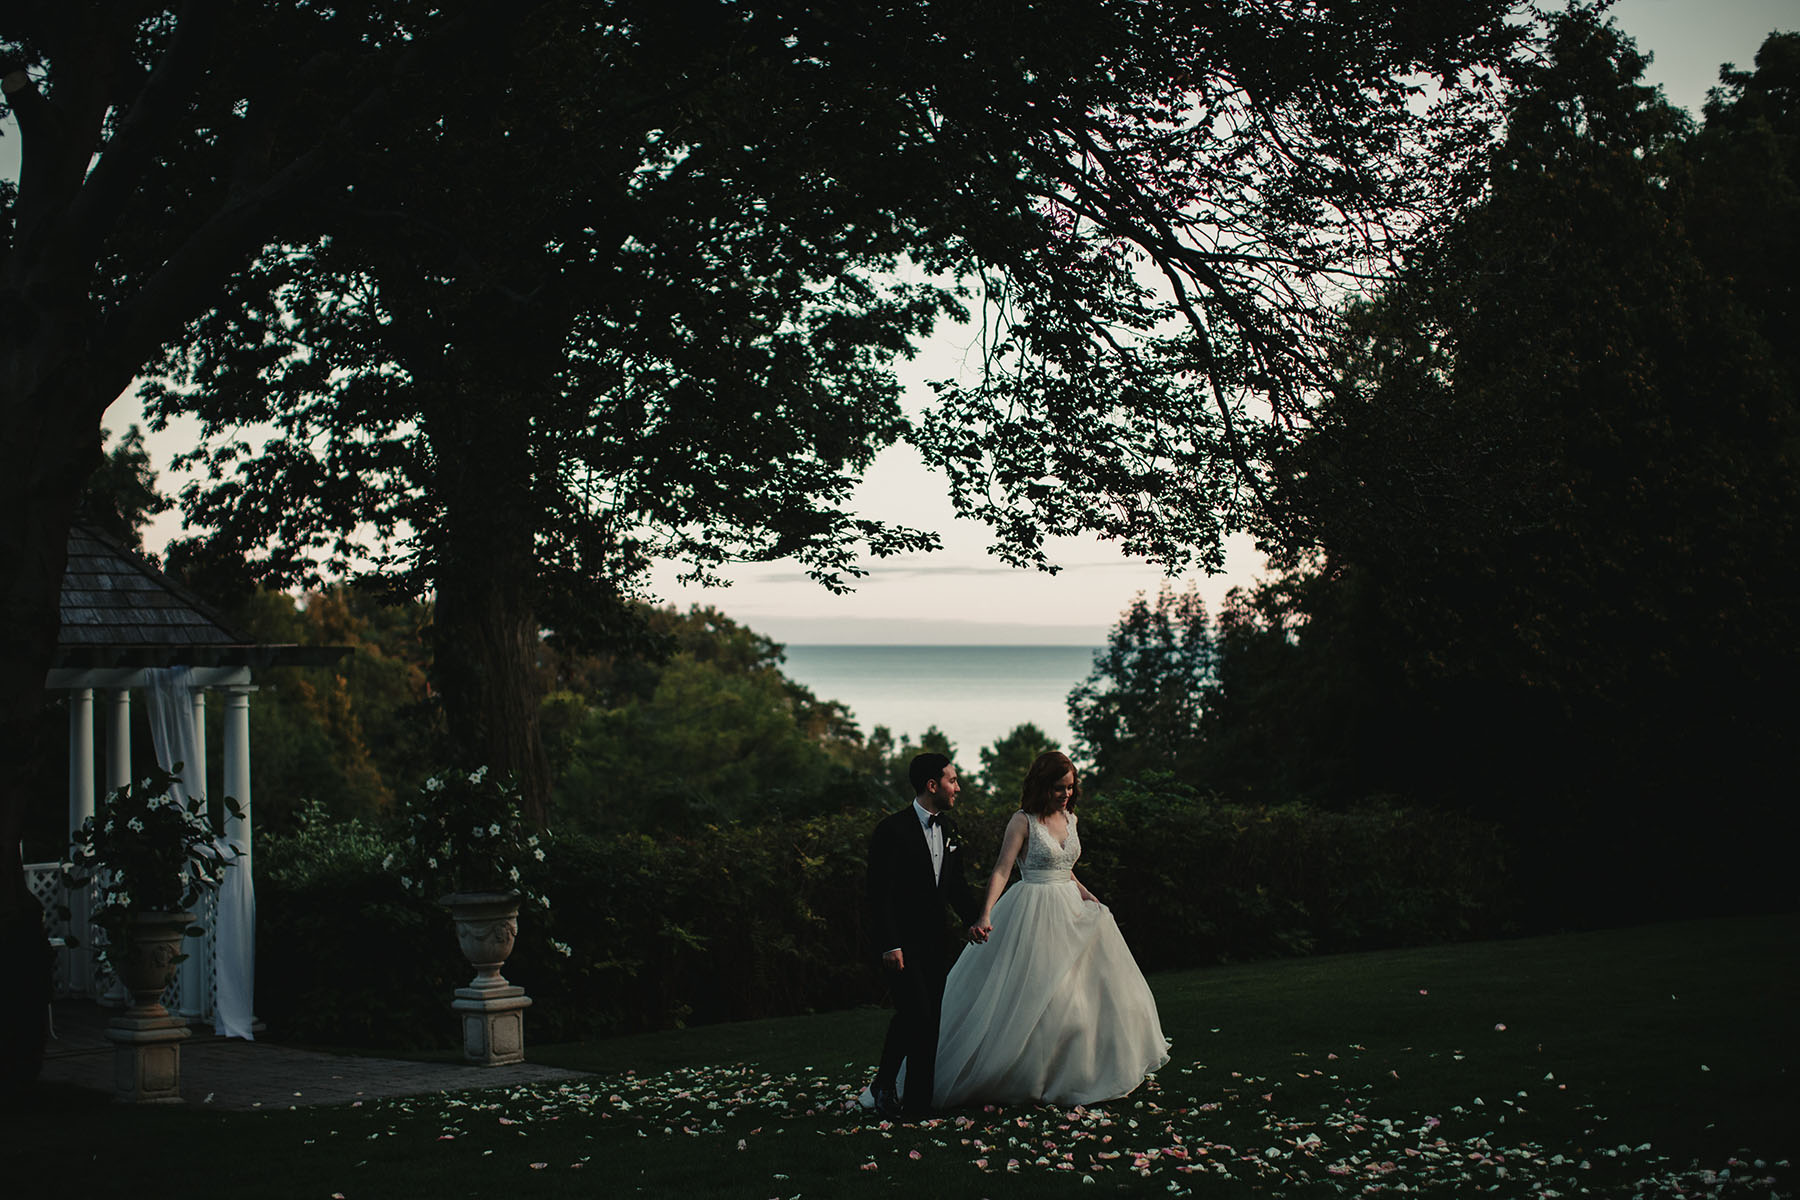 Beautiful setting of golf course over looking Lake Ontario. Bride and groom walking thru the grass.